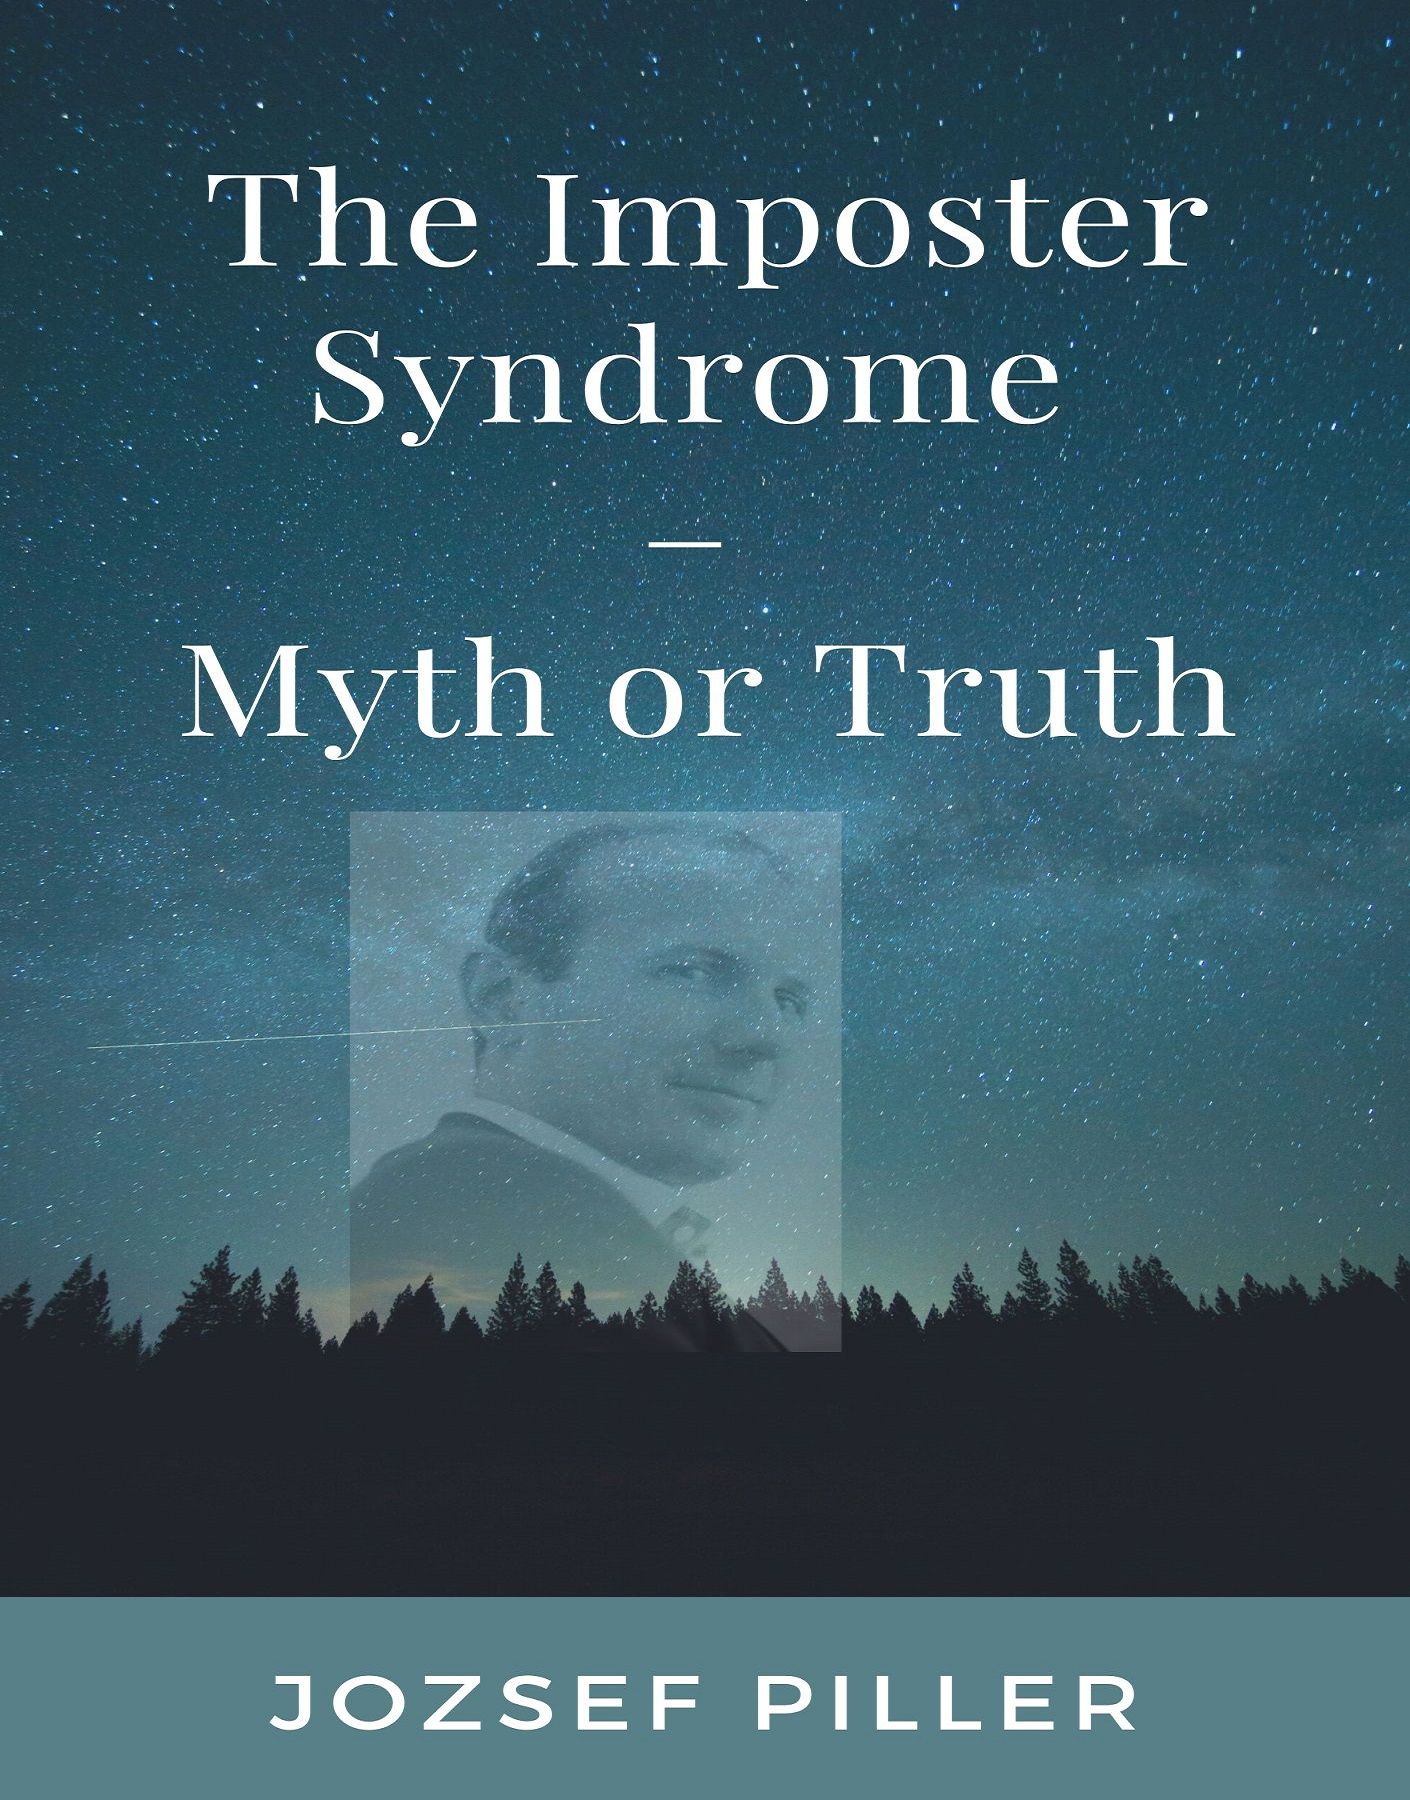 The Imposter Syndrome – Myth or Truth?, audiobook by Jozsef Piller